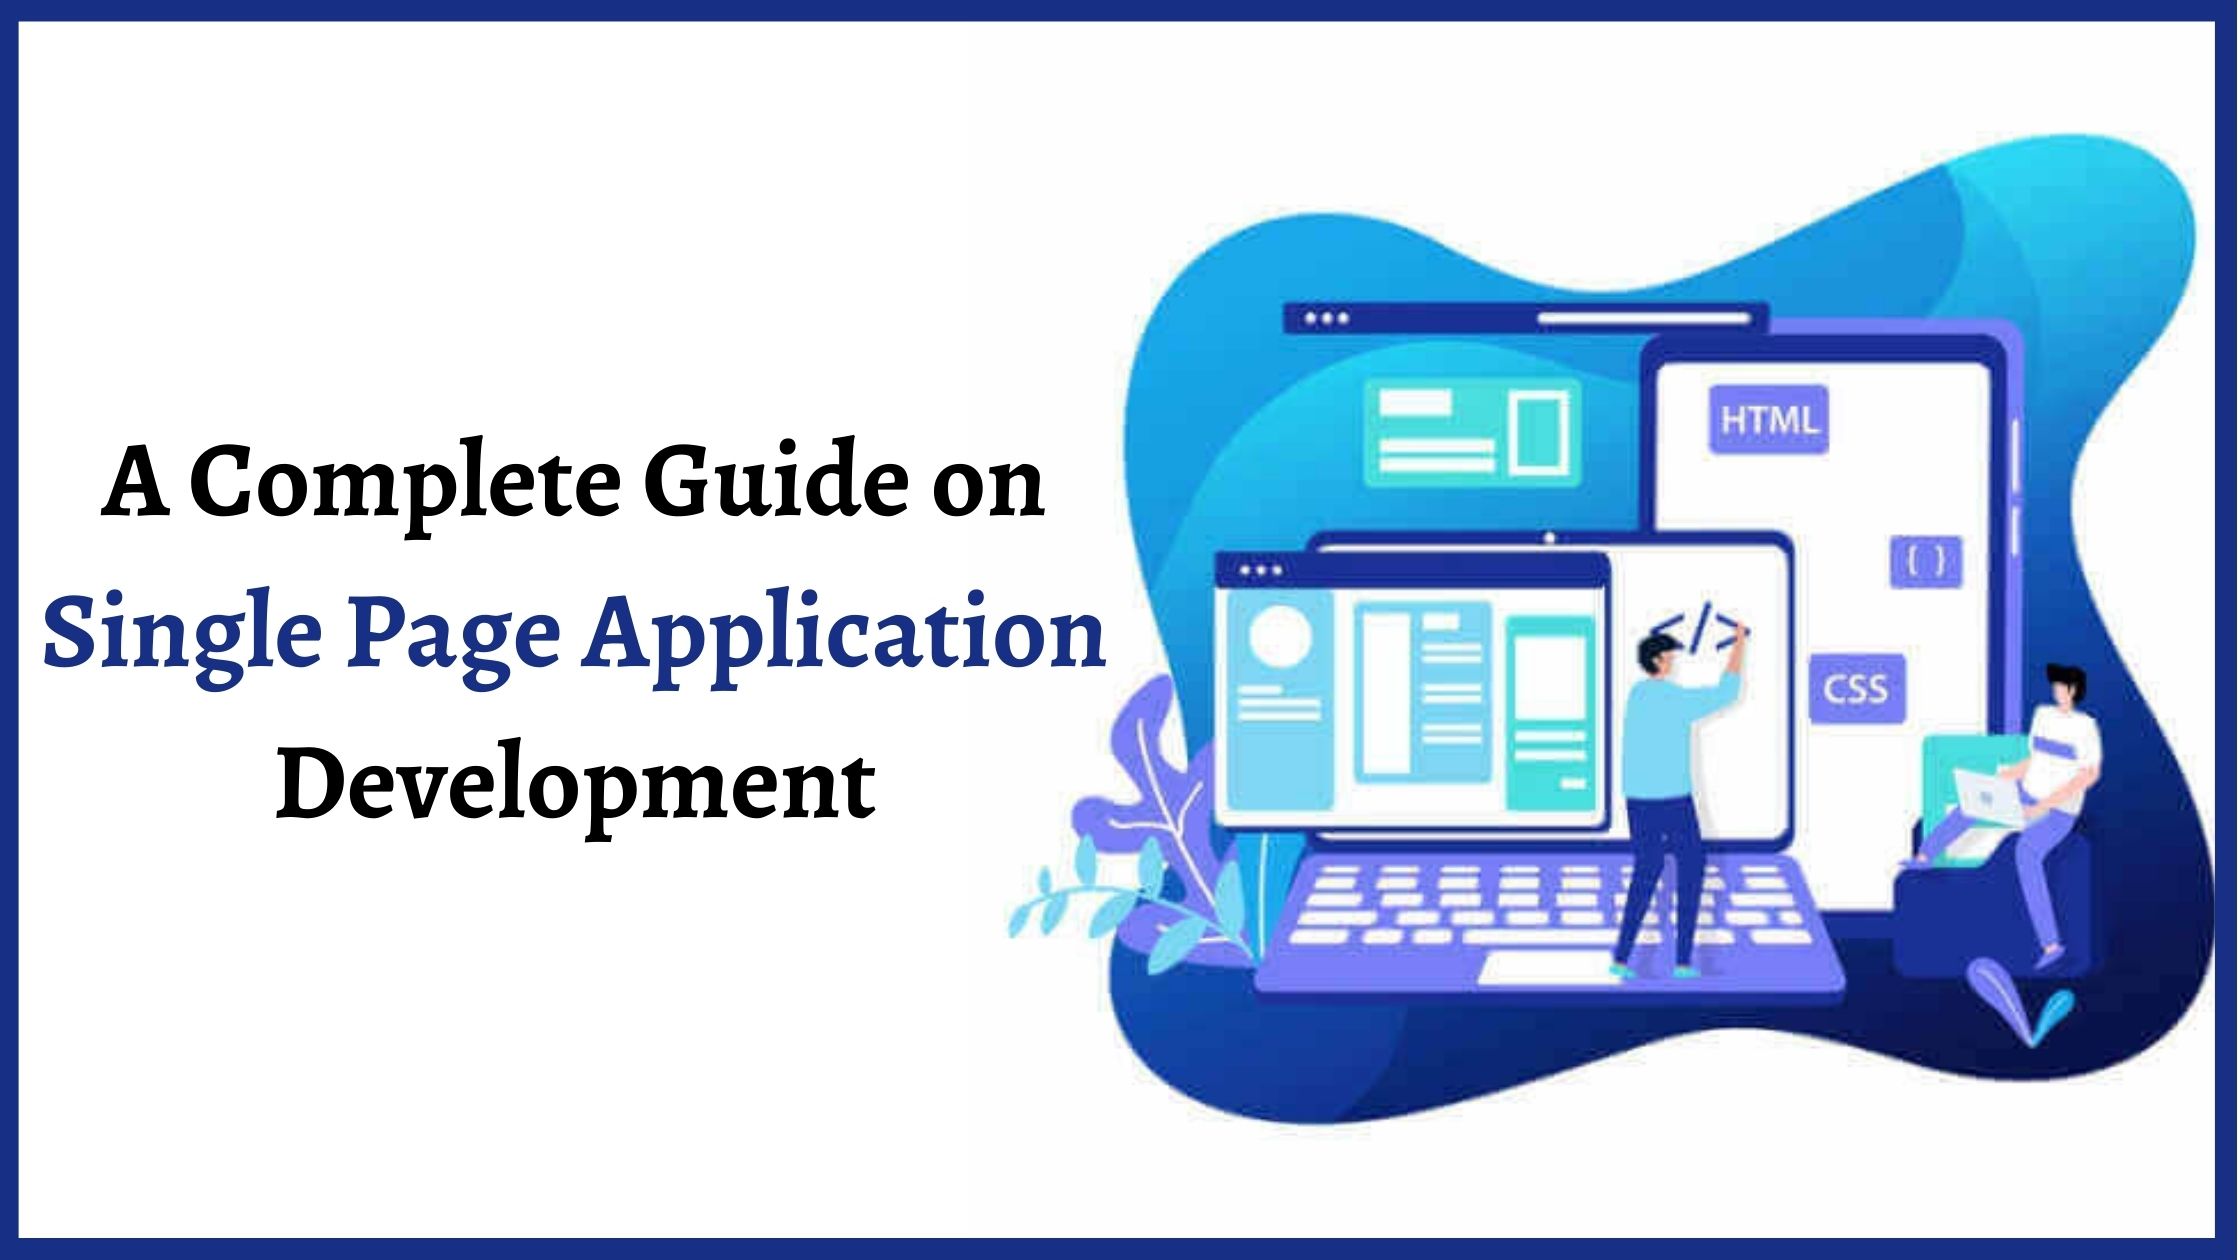 A Complete Guide on Single Page Application Development